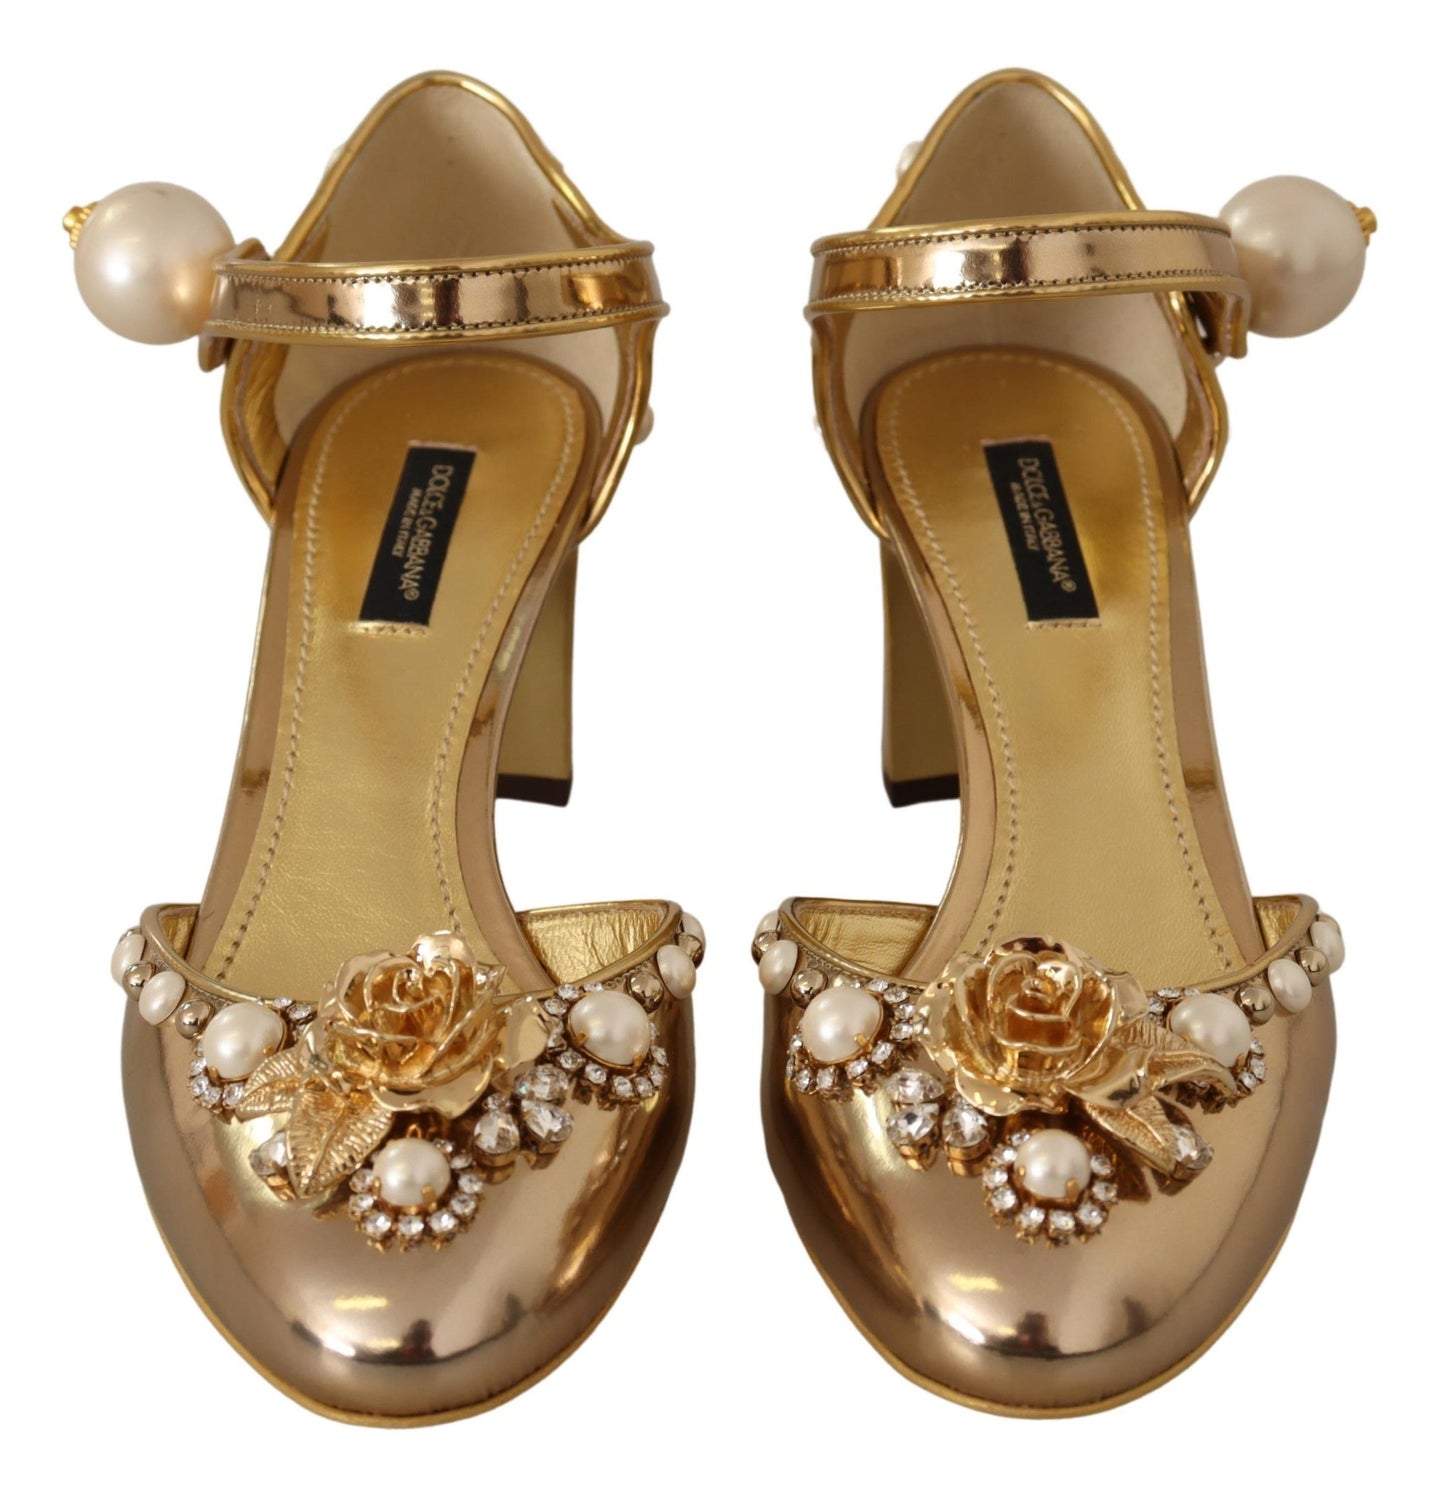 Elegant Gold Leather Block Heels with Crystals